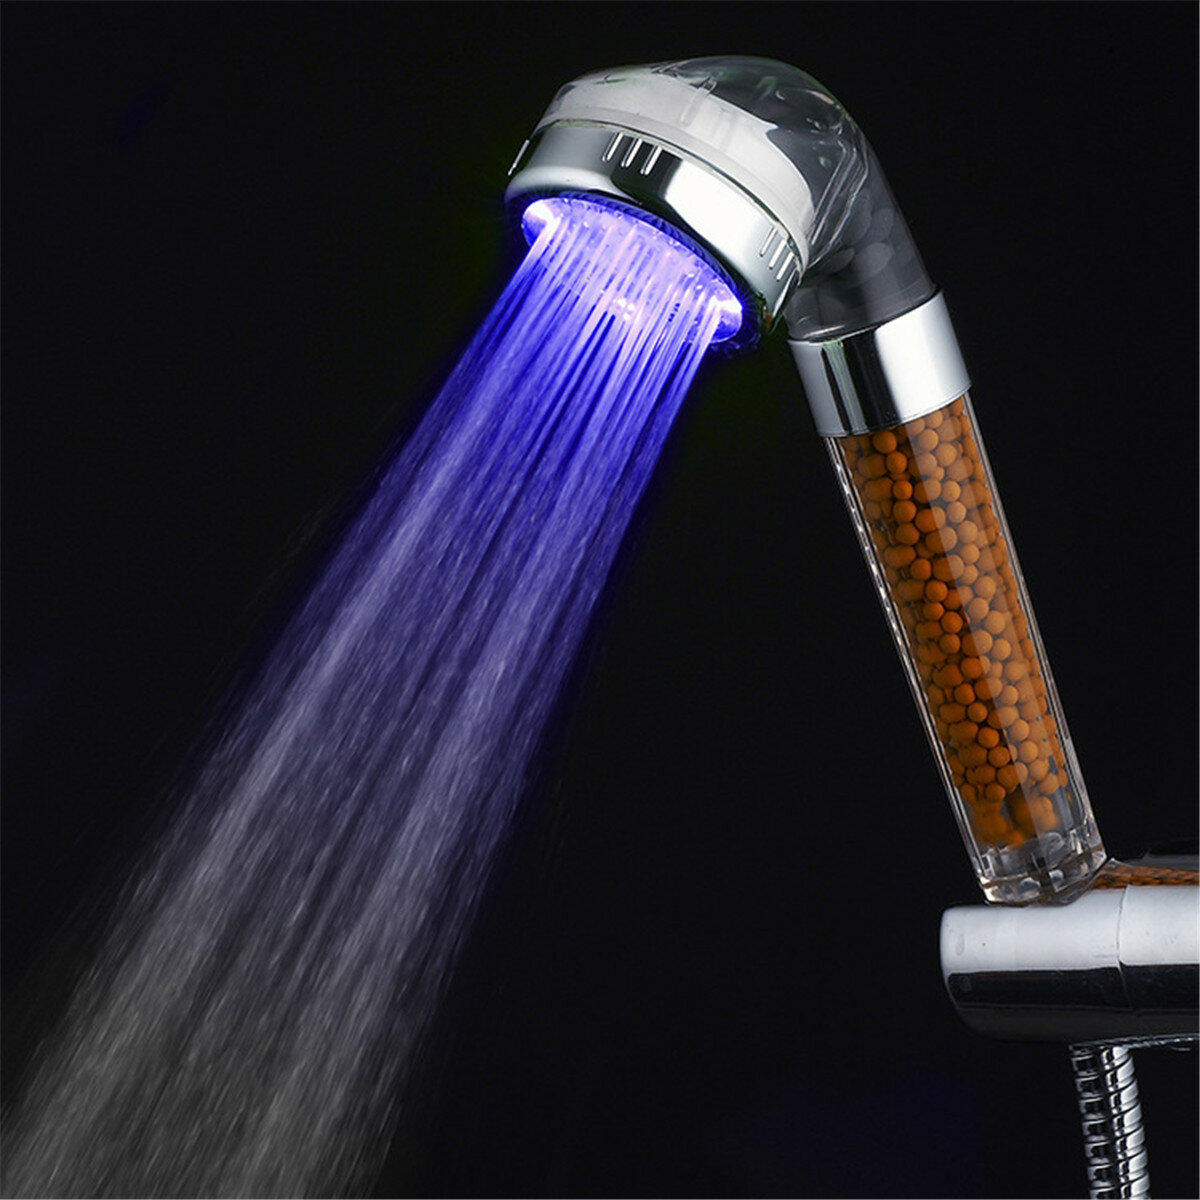 

7 Color Changing LED Anion Spa Shower Head Temperature Control Bathroom